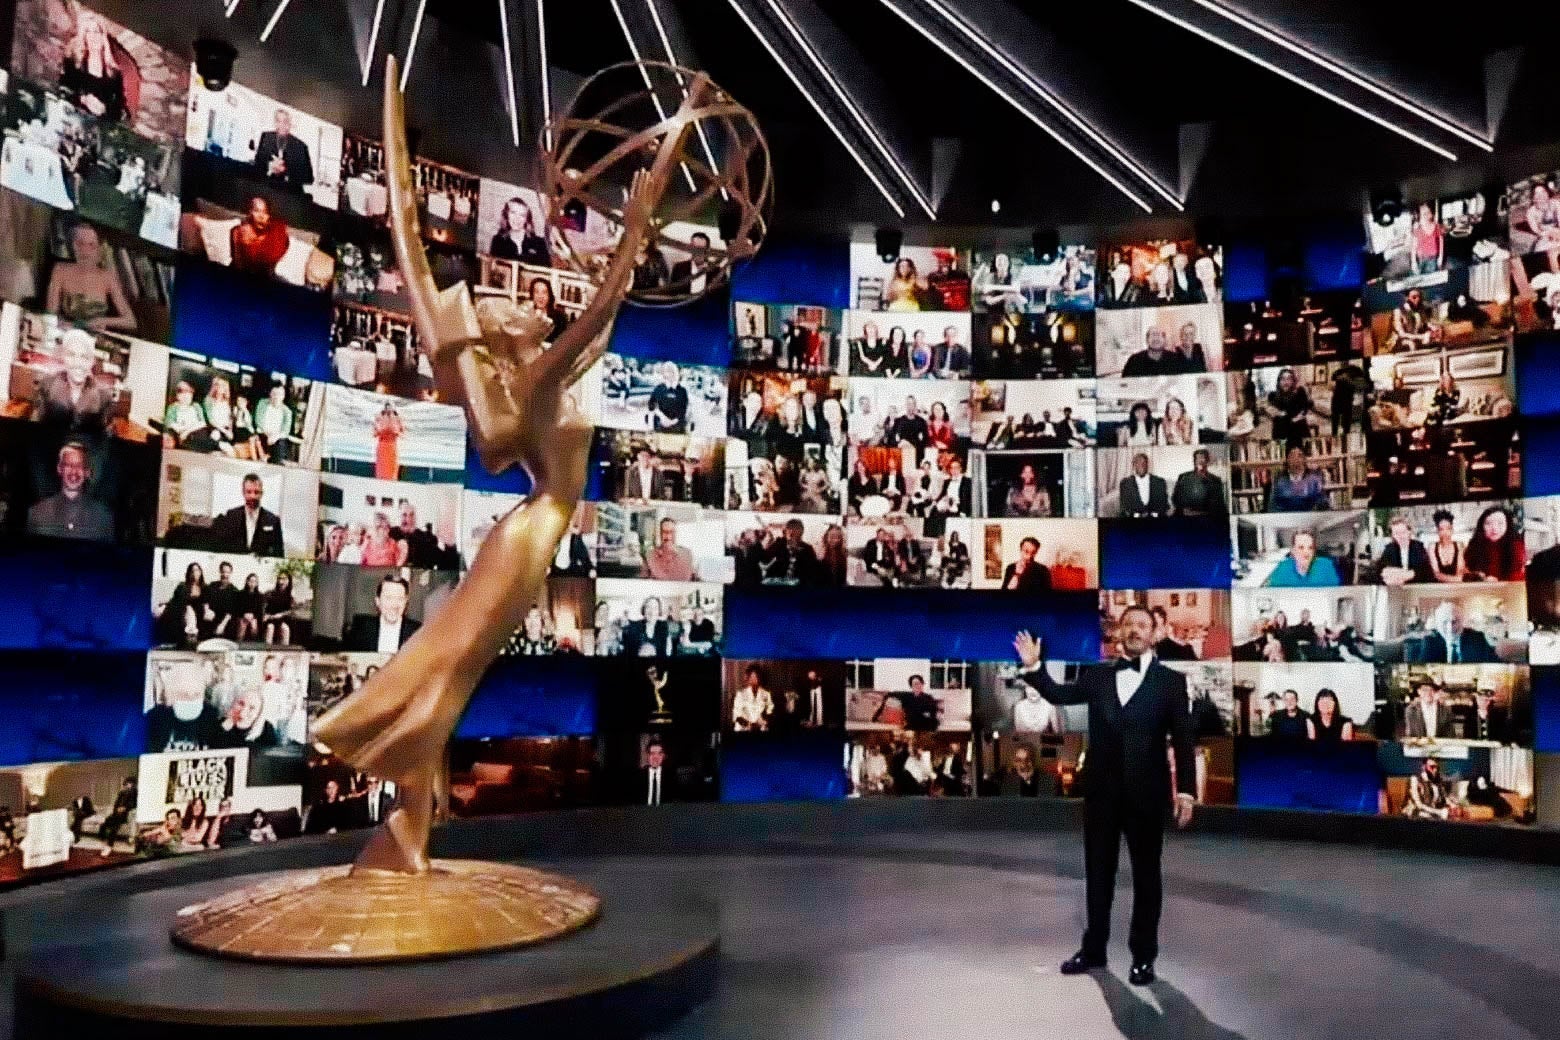 Jimmy Kimmel next to a large Emmys statuette and in front of Zoom screens.